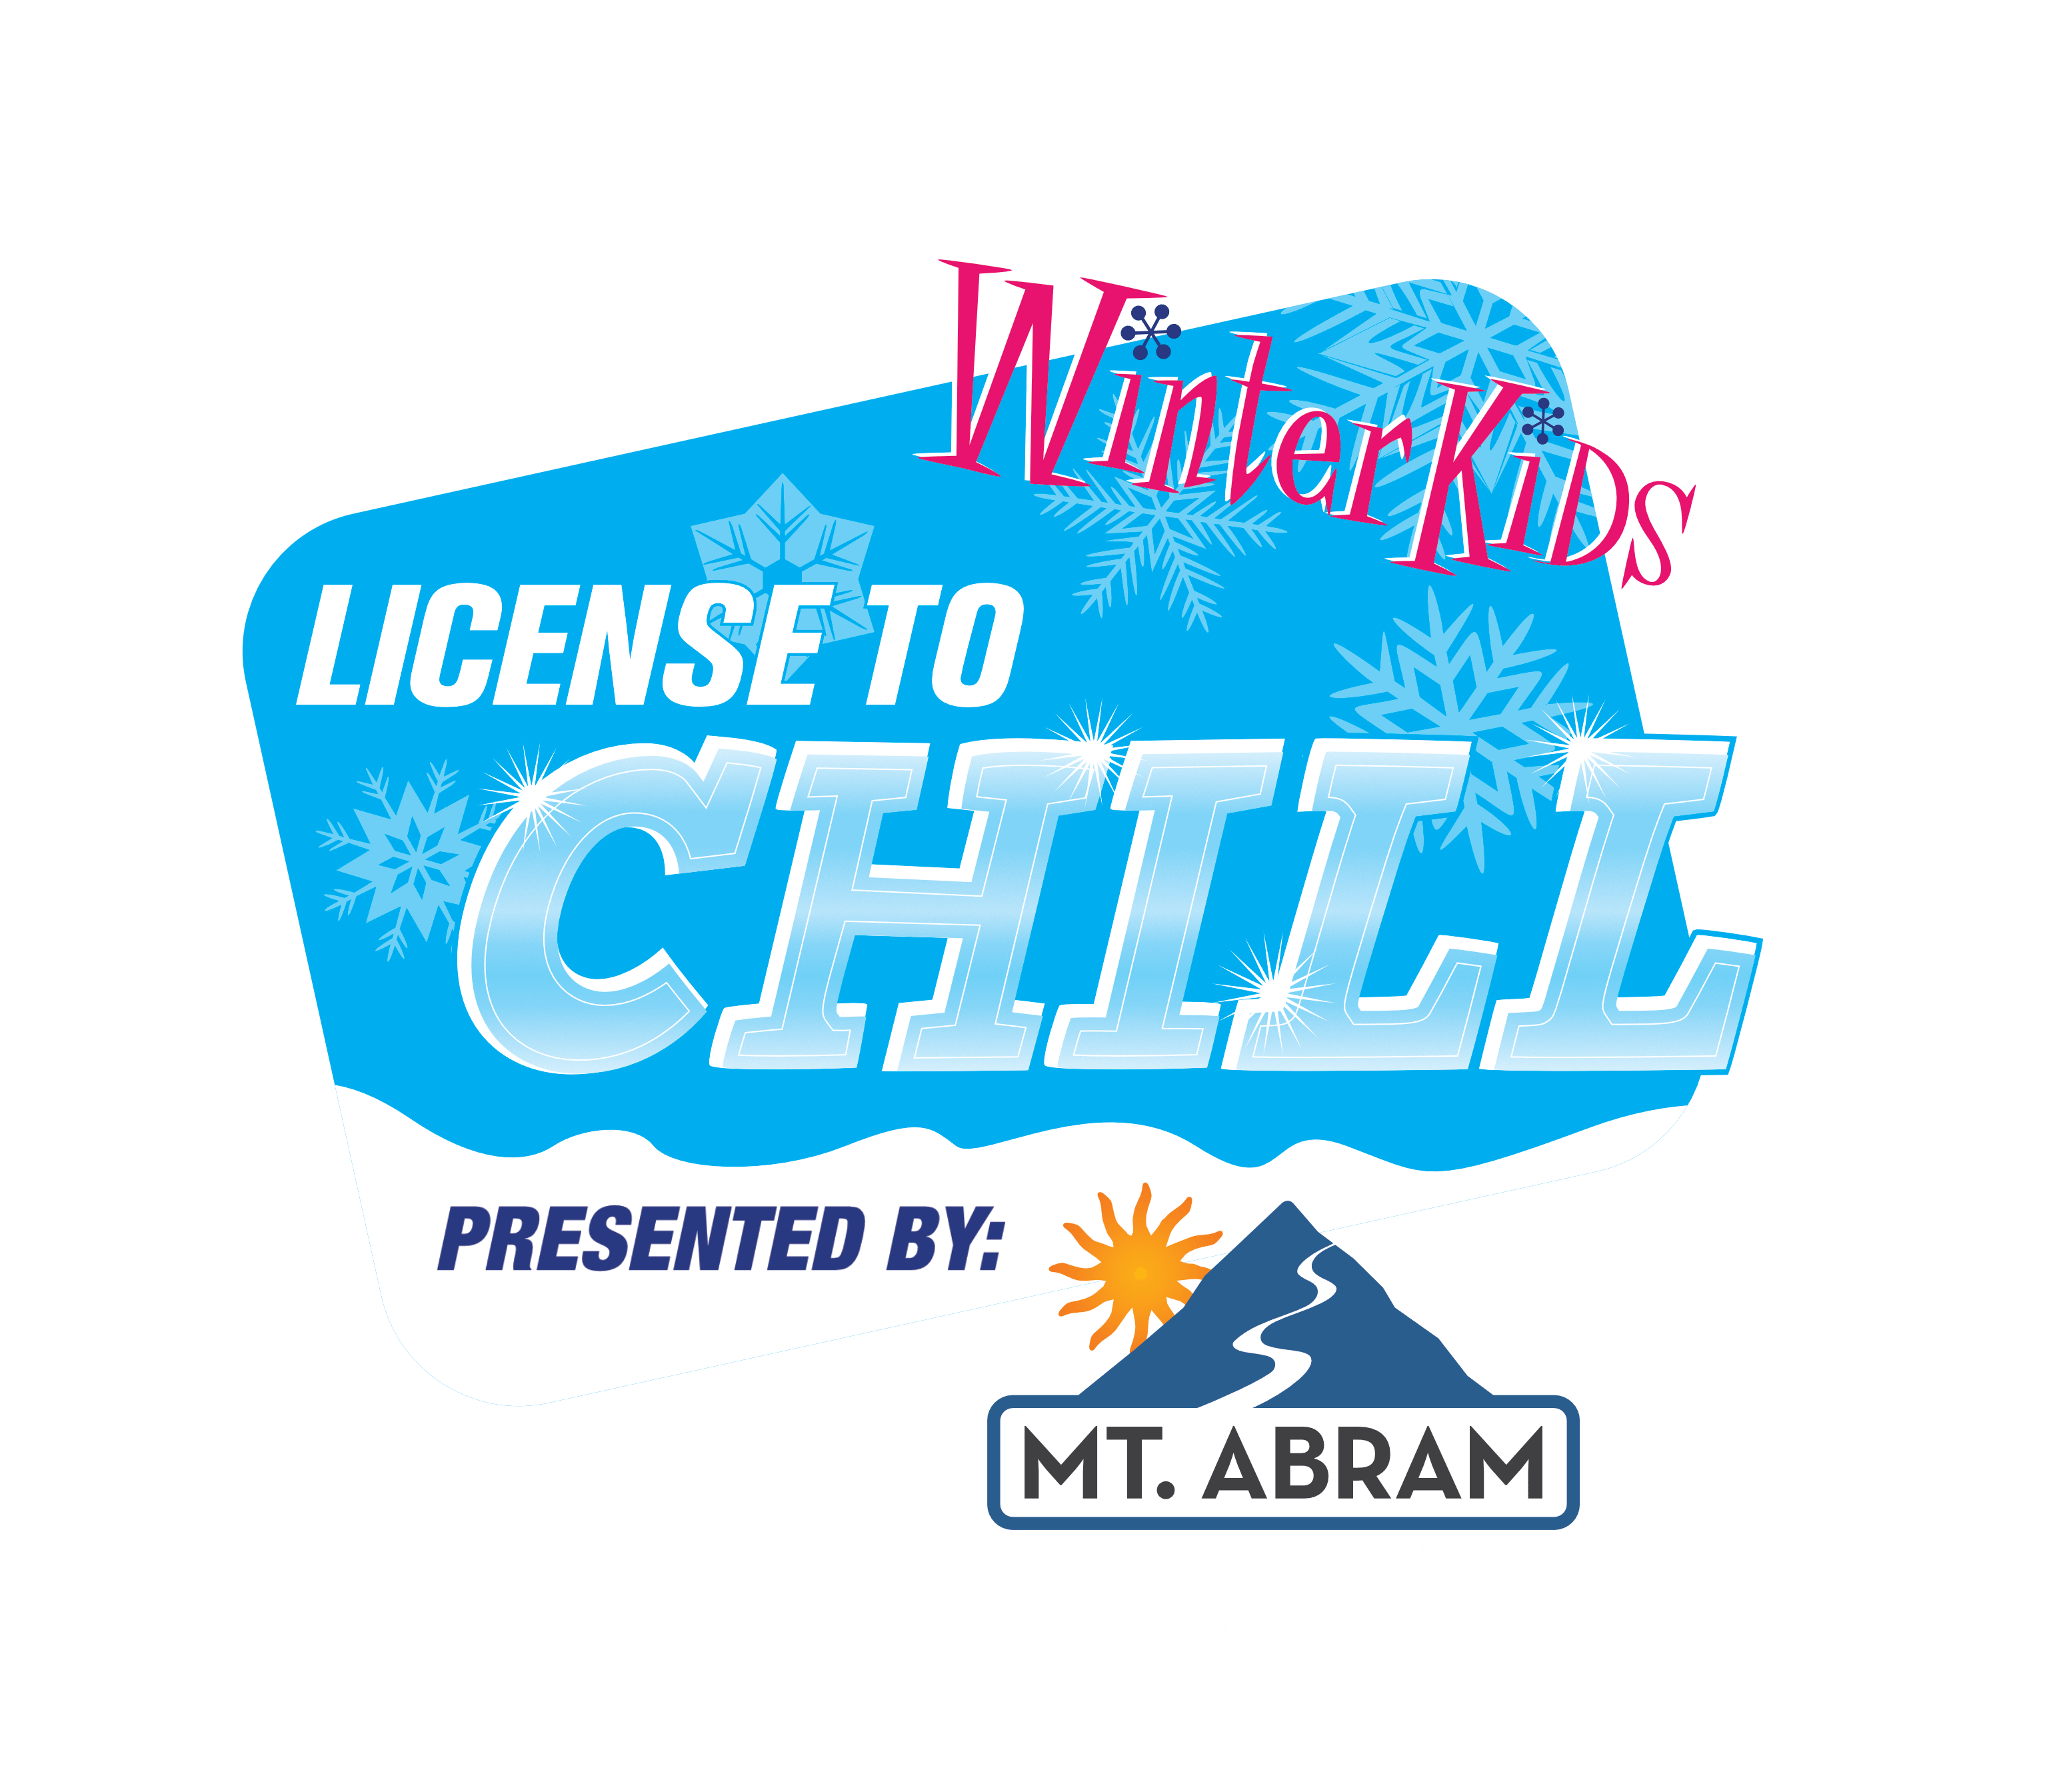 License to Chill Mt Abram for dark backgrounds